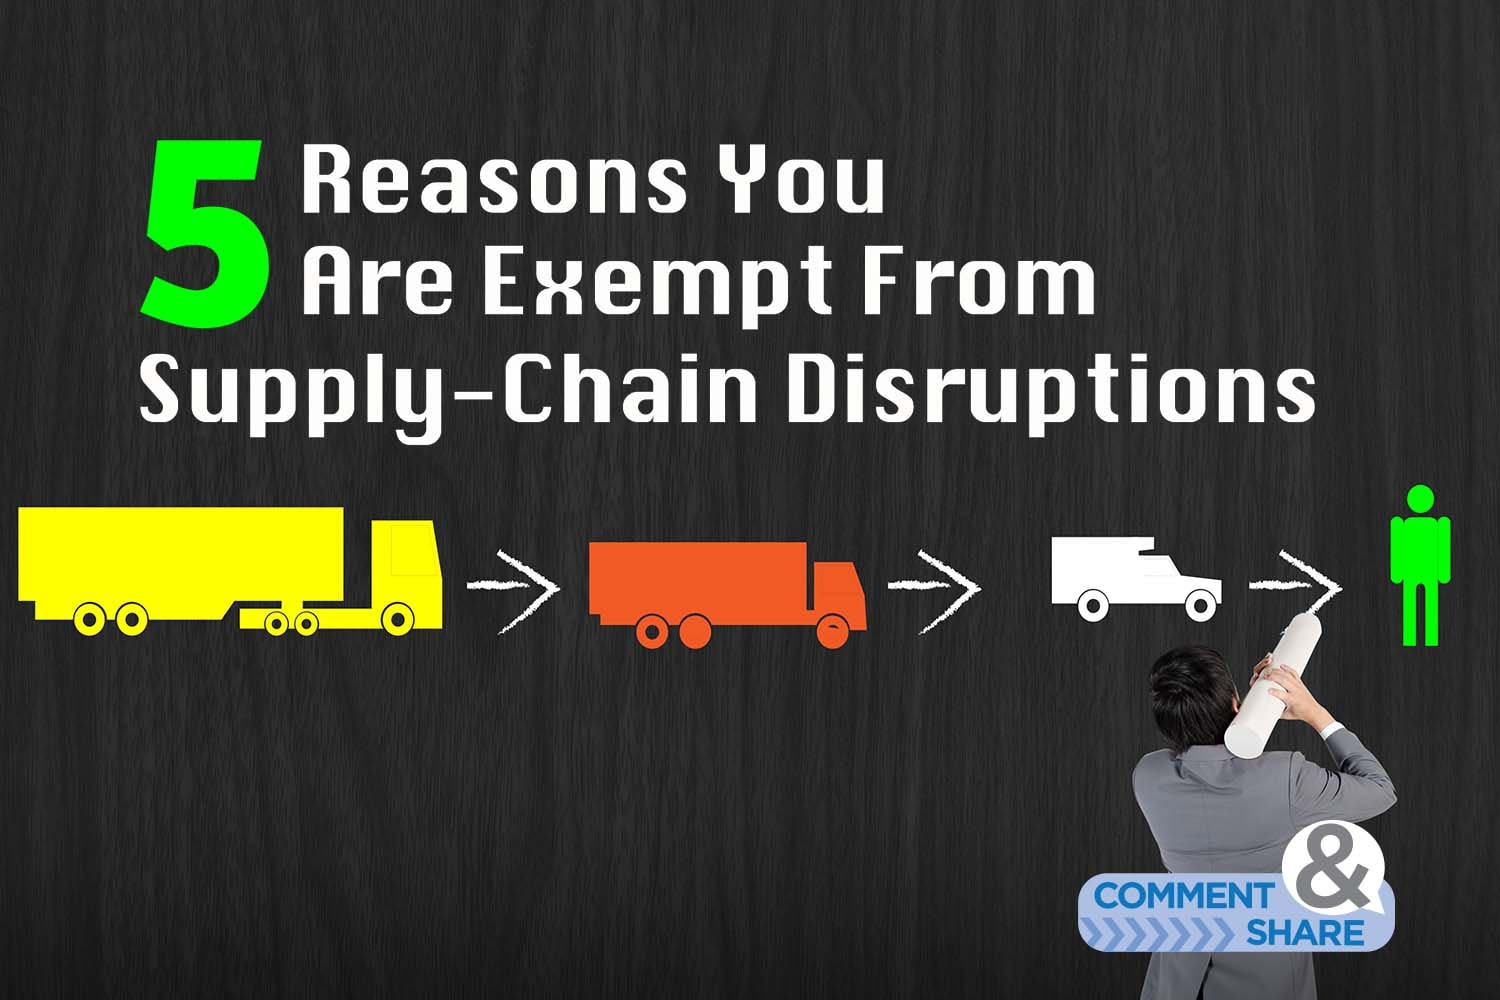 5 Reasons You Are Exempt From Supply-Chain Disruptions